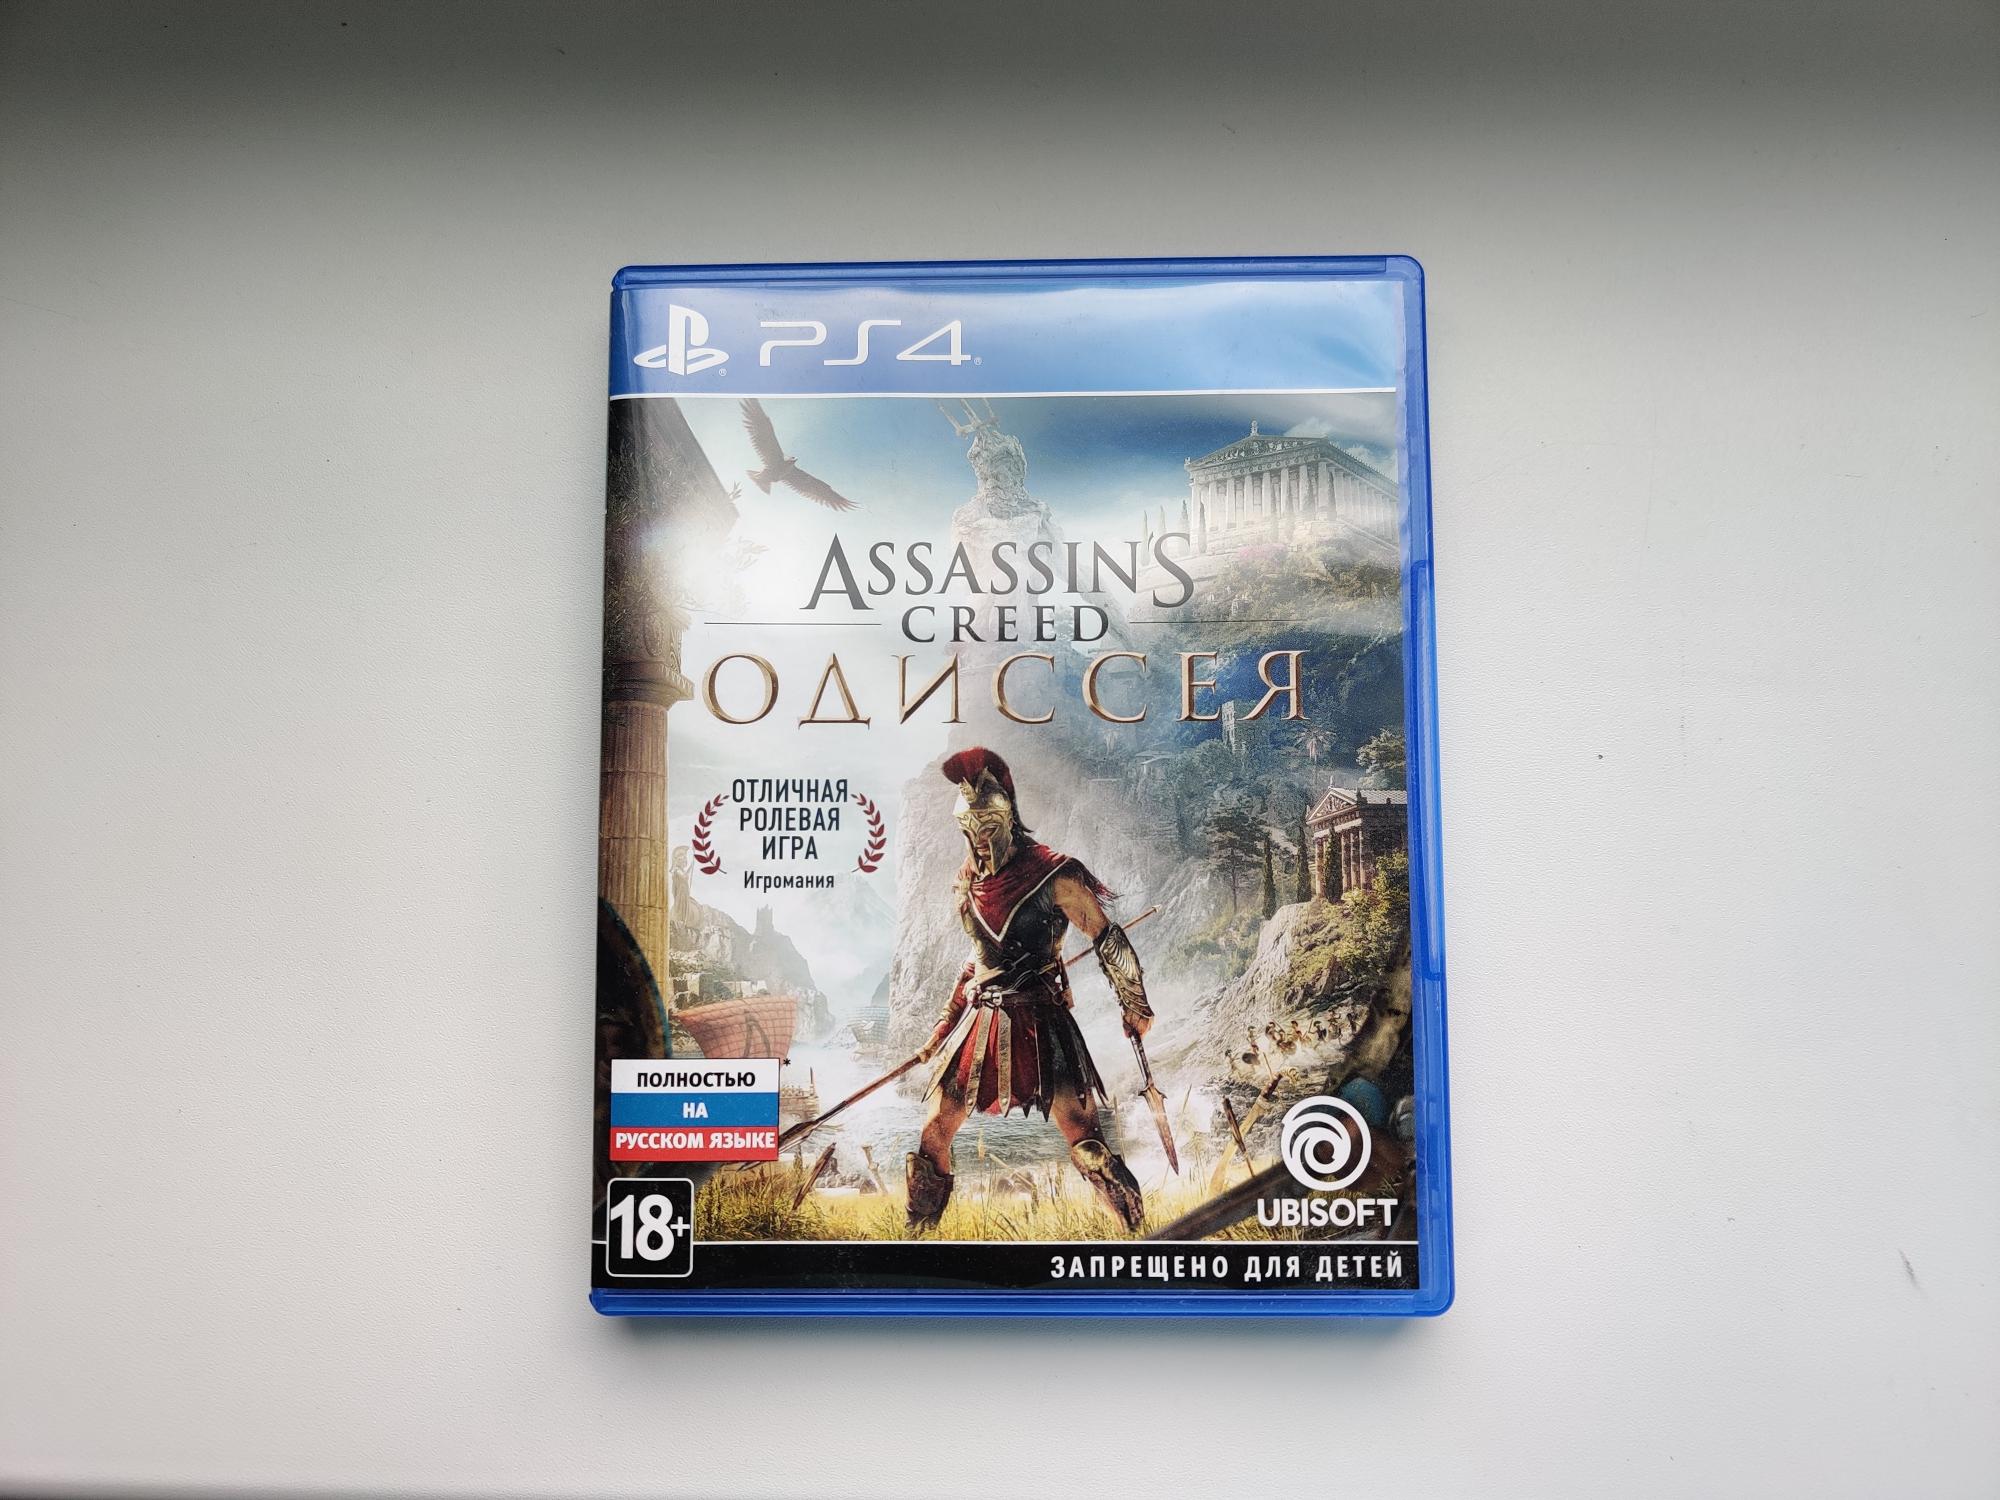 Assassin odyssey ps4. Assassin's Creed Одиссея ps4. Assassin's Creed Odyssey ps4 диск. Одиссея диск ps4.